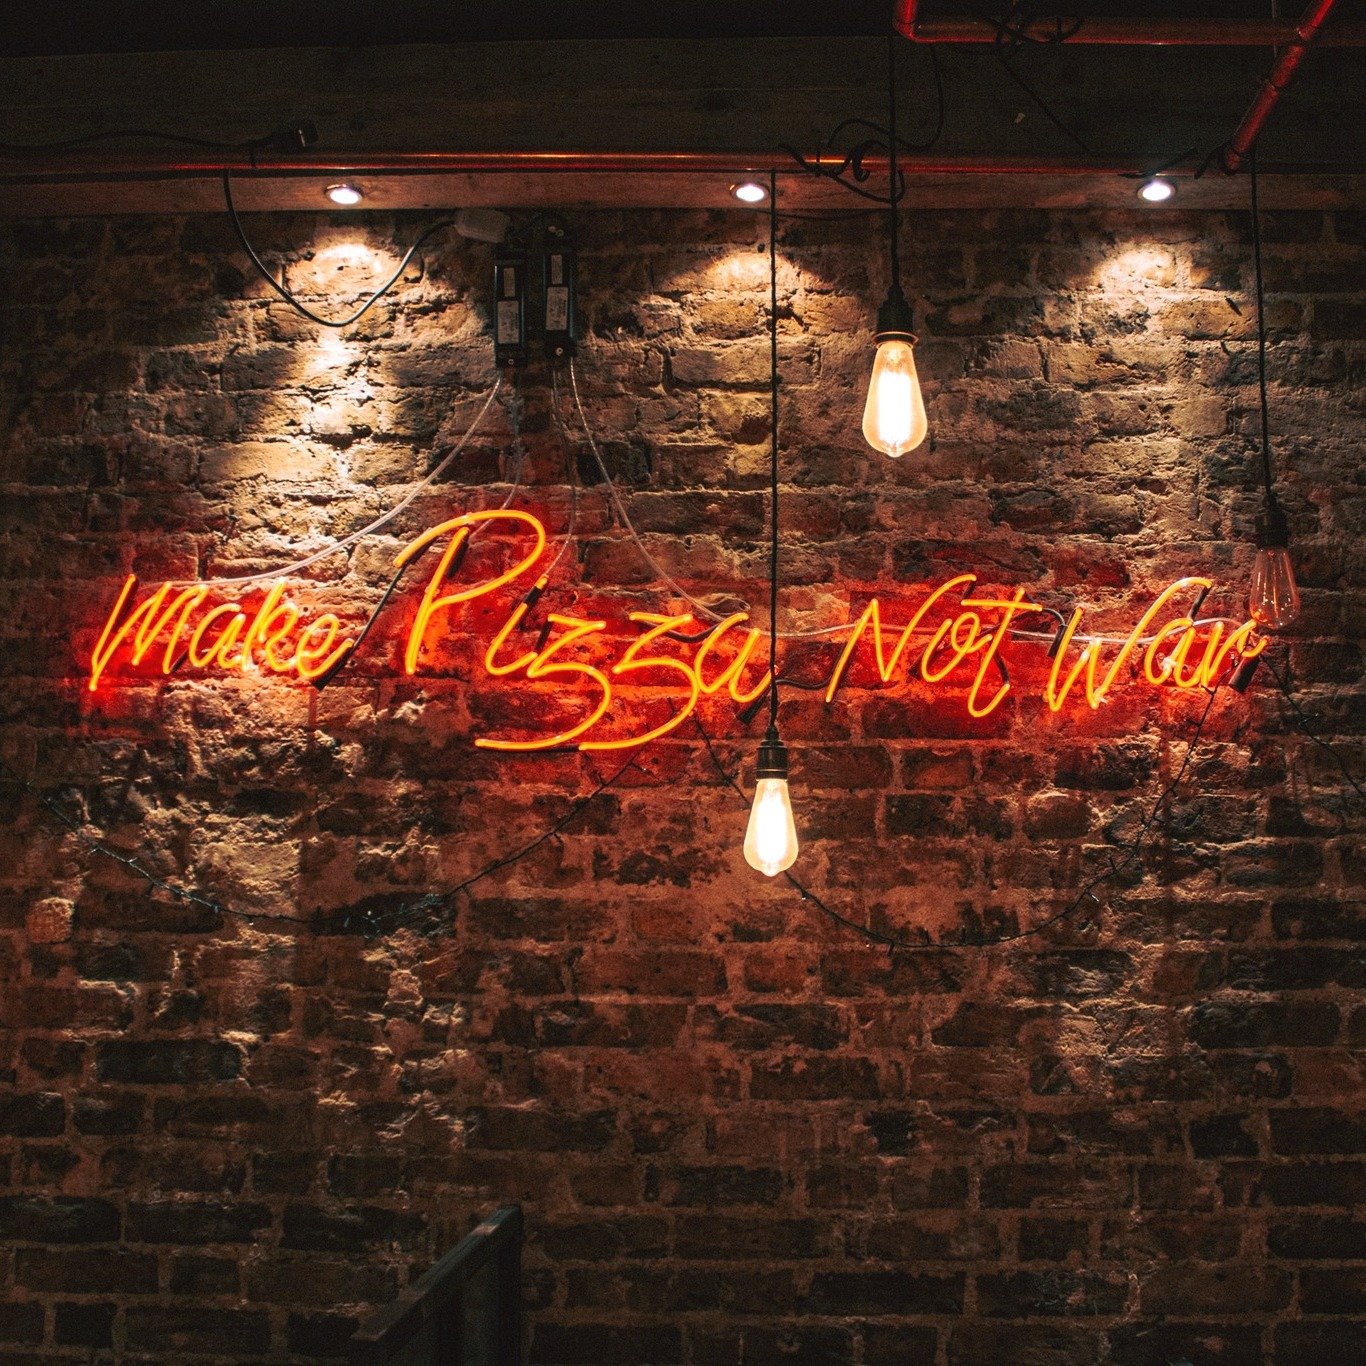 Come and visit us for great food, vibes, and a restaurant practically begging to be featured in your insta feed!

#PizzaWars #PastaParadise #NeonDreams #TouristApproved #vespaitalian #italianrestaurant #independentitalianrestaurantlondon #vespaitalia